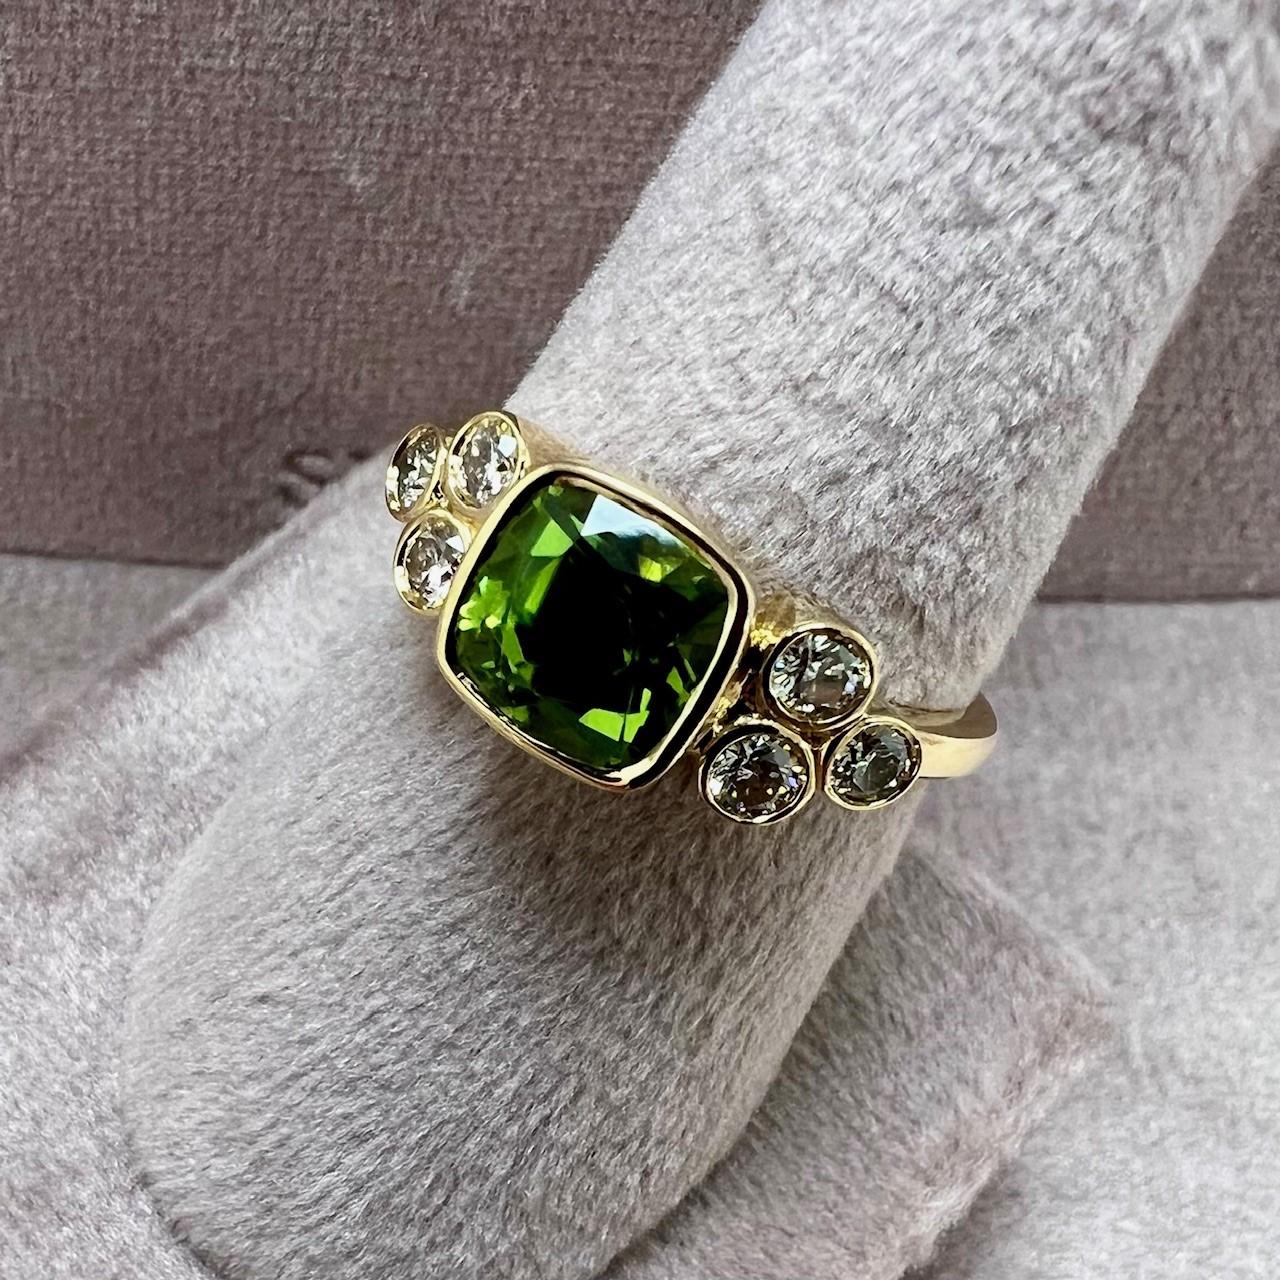 Created in 18 karat yellow gold
Peridot 2.30 carats approx.
Diamonds 0.35 carat approx.
Ring size US 7, can be sized
Limited edition


About the Designers ~ Dharmesh & Namrata

Drawing inspiration from little things, Dharmesh & Namrata Kothari have